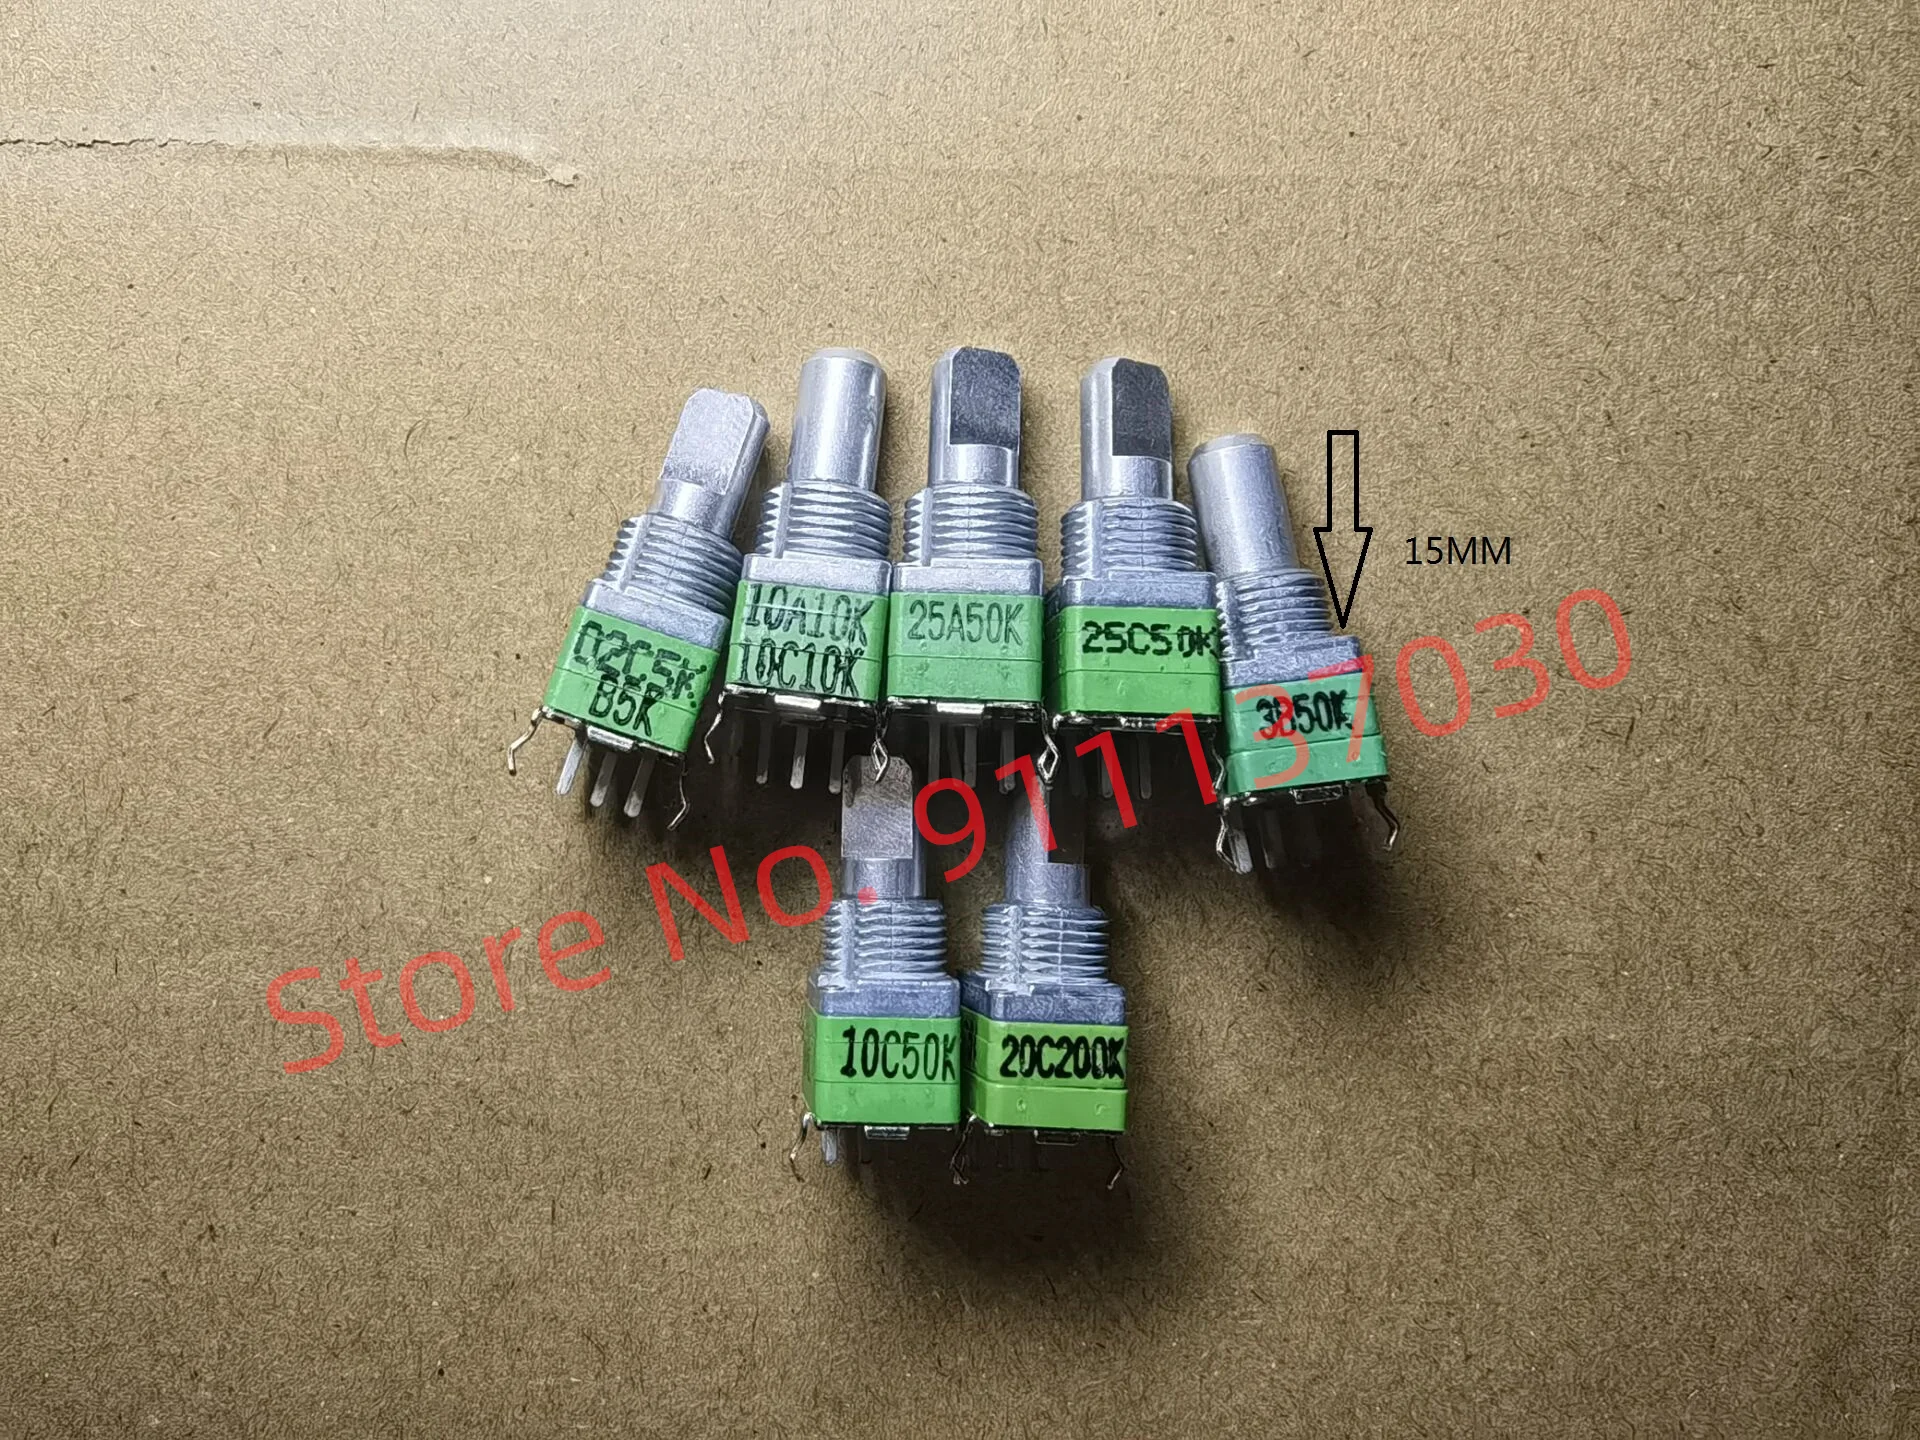 1pcs/lot   For ALPHA RK09 Potentiometer   double  6Pin  C5K A10K  C50K  B50K A50K C200K  09 15MM handle   6Pin